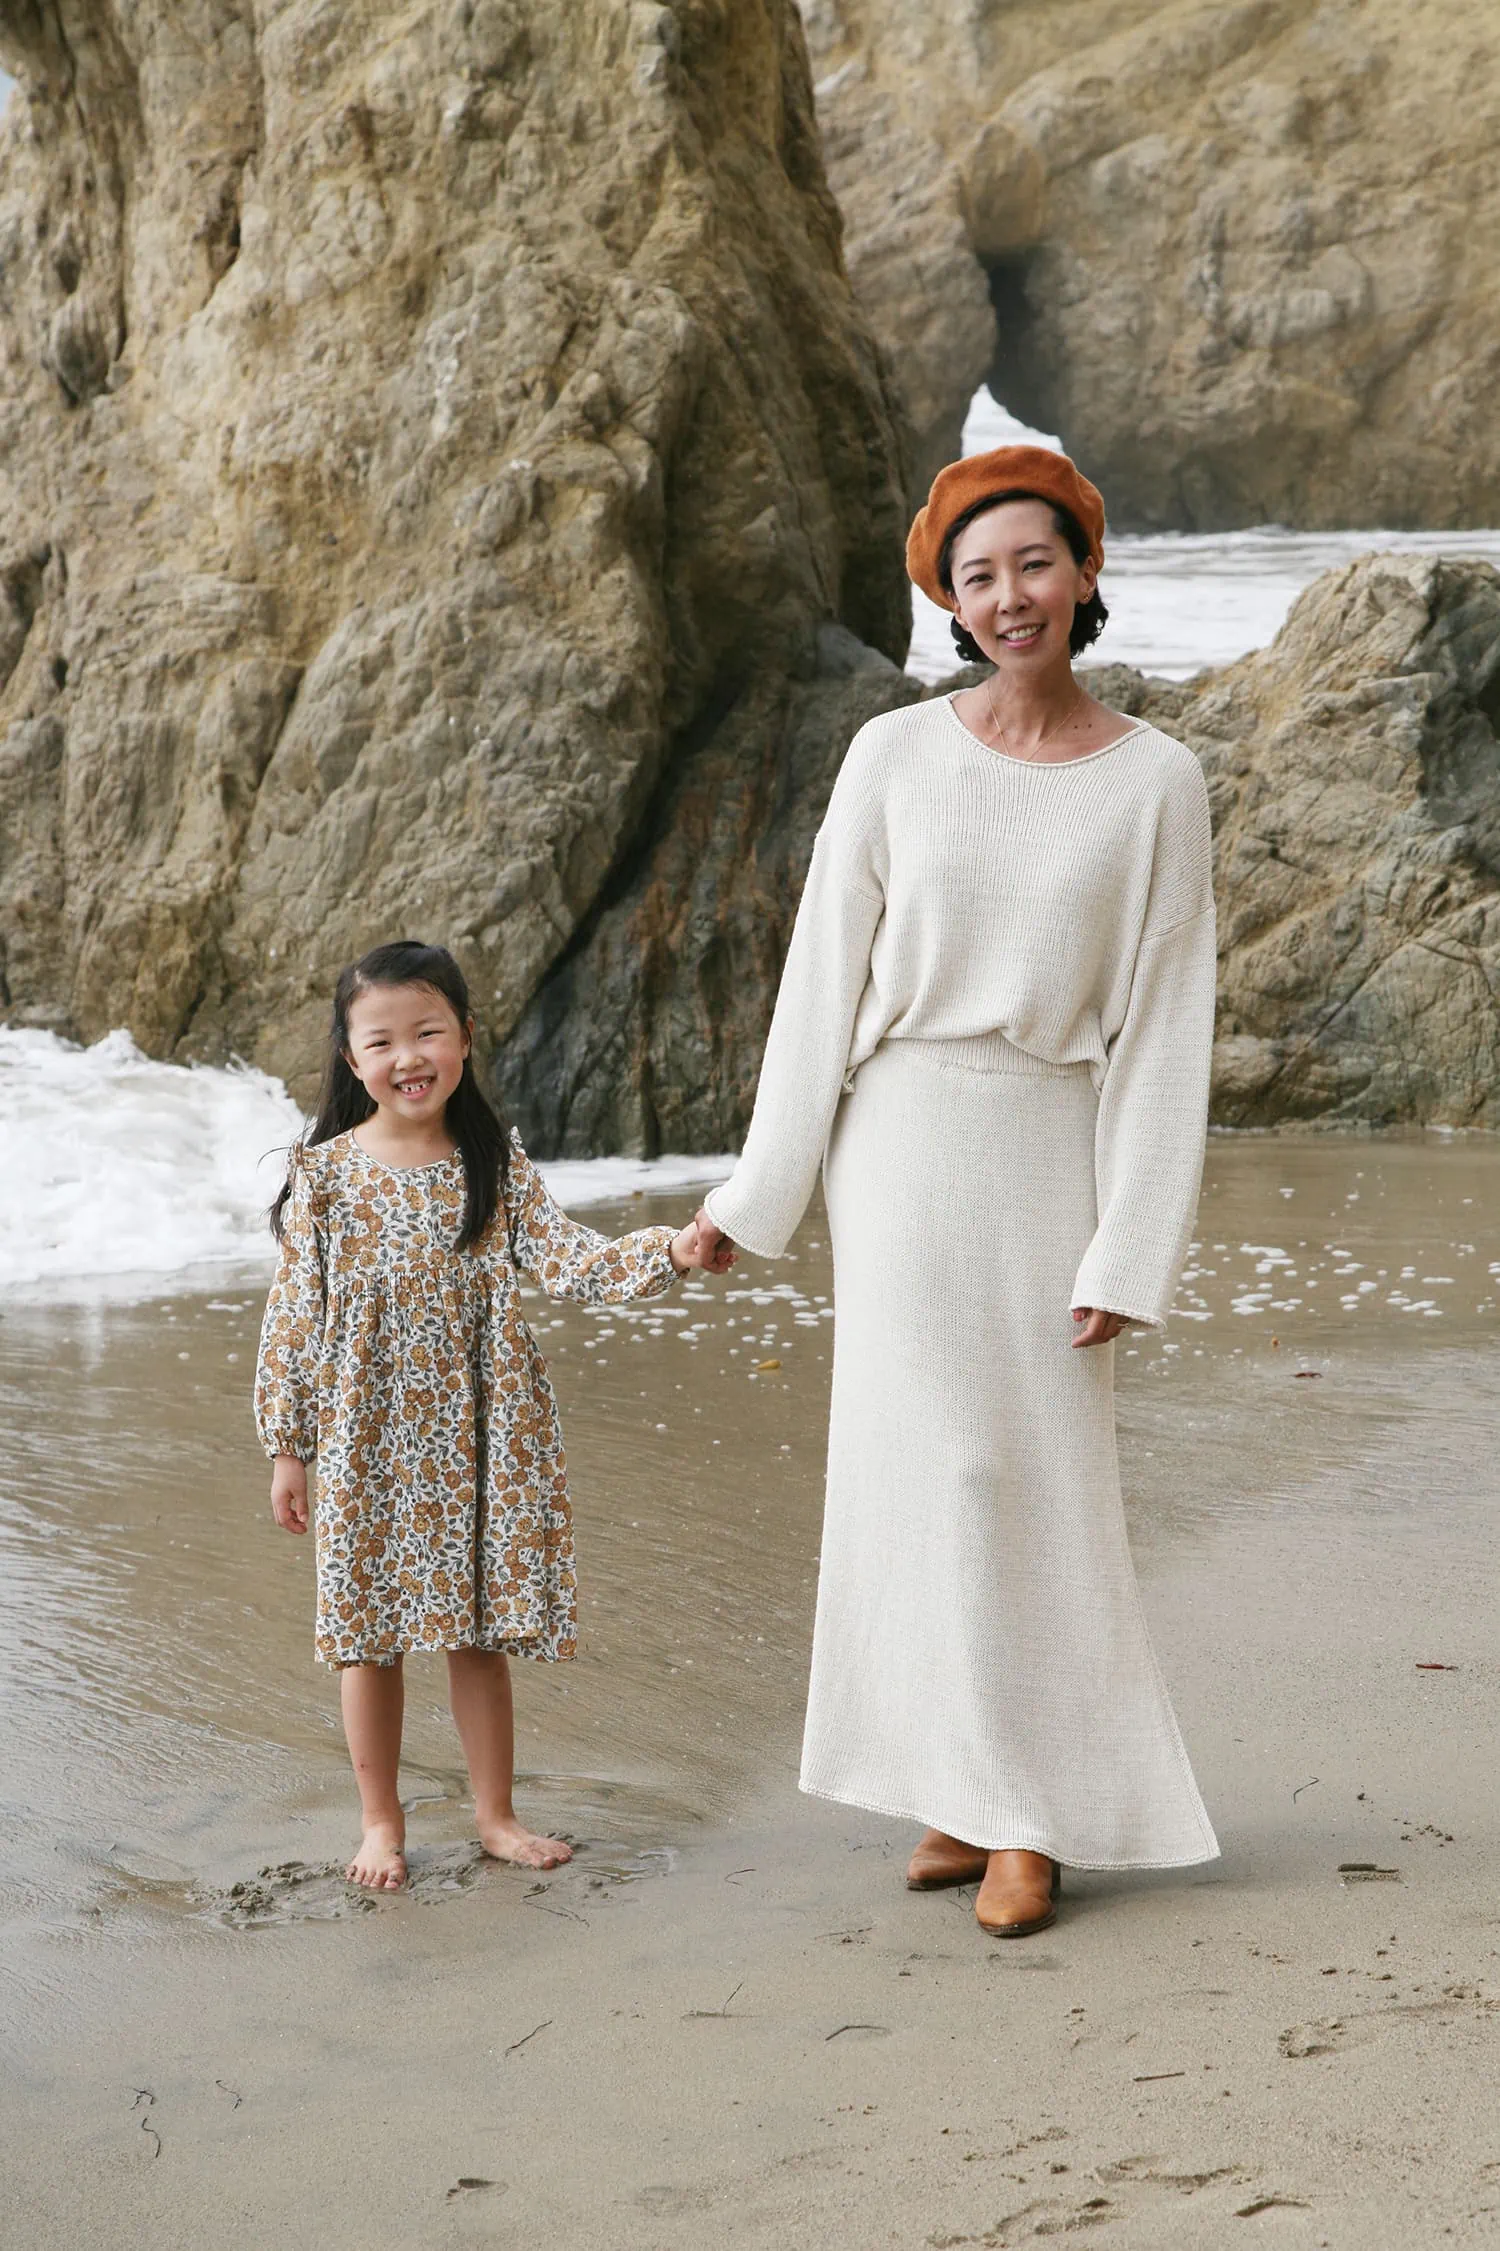 Jeanee and her daughter are standing on a beach. They're holding hands and smiling at the camera.